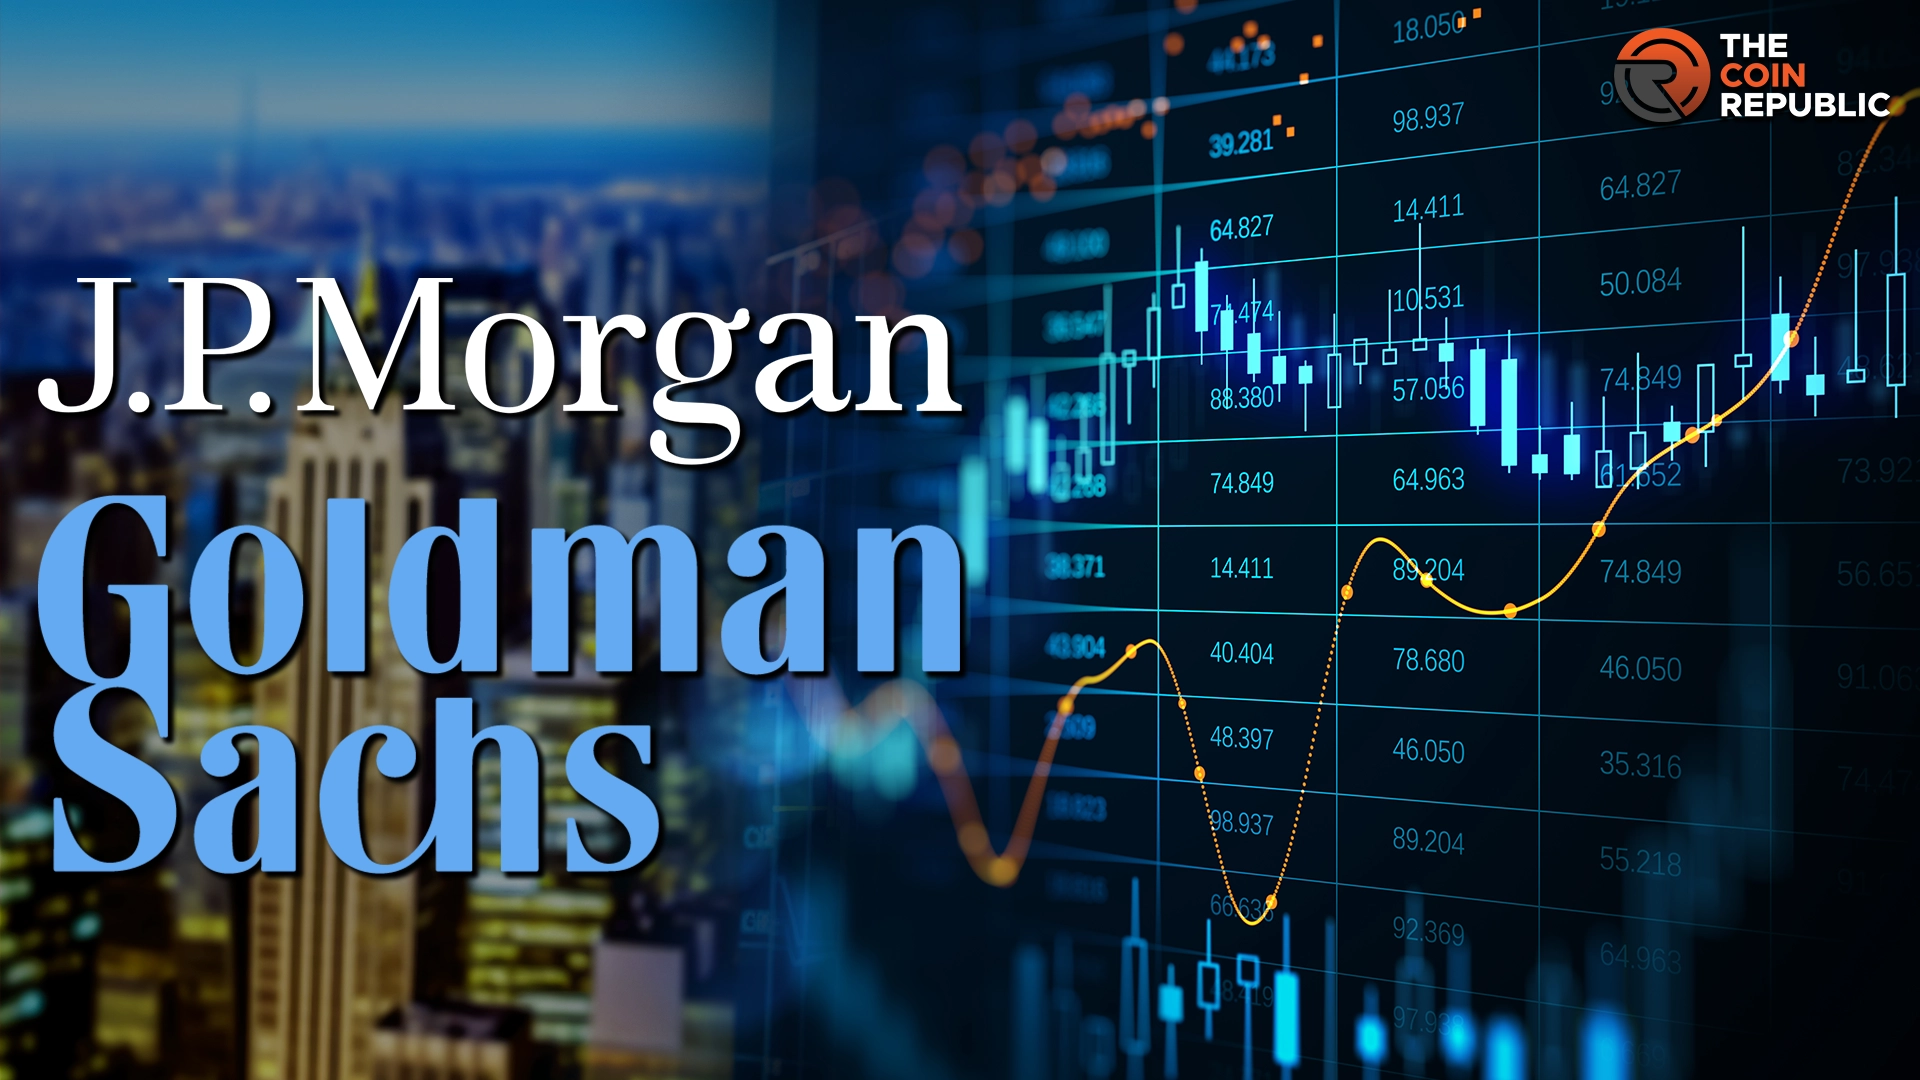 Delayed Rate Cut Expectations From J.P. Morgan And Goldman Sachs